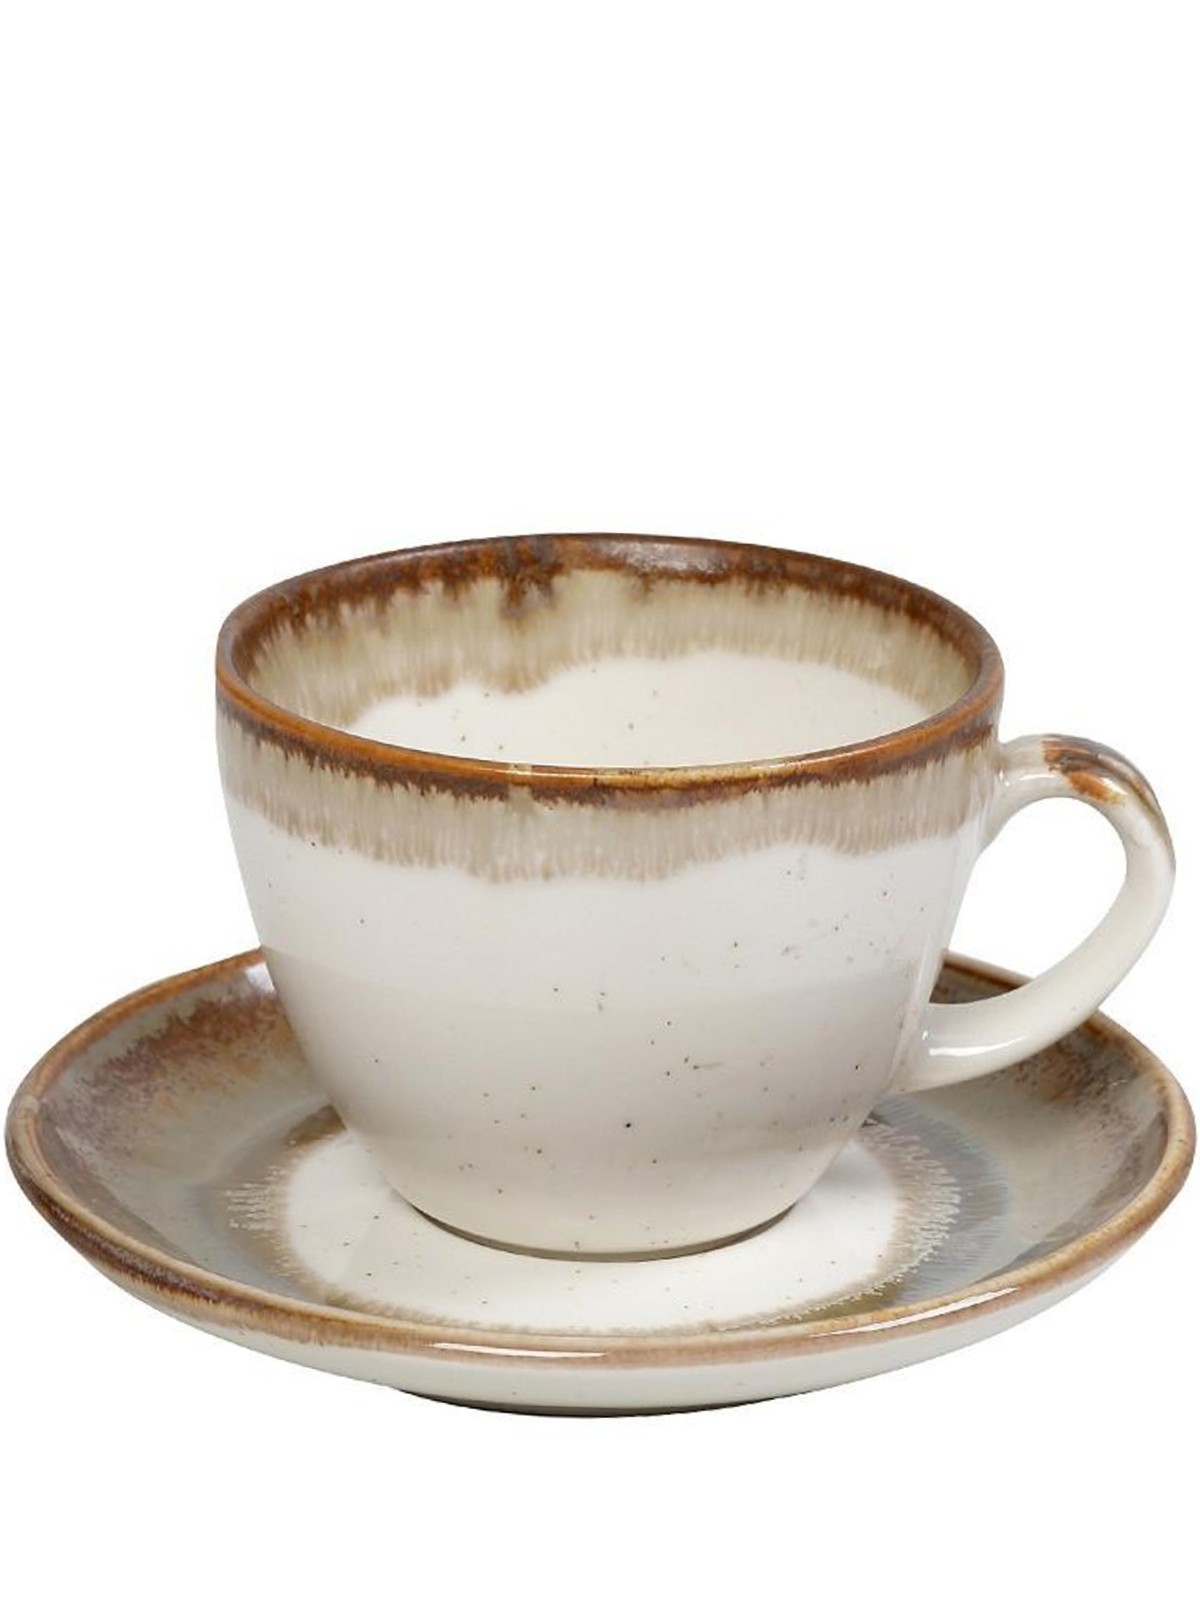 Cappuccino cup with saucer